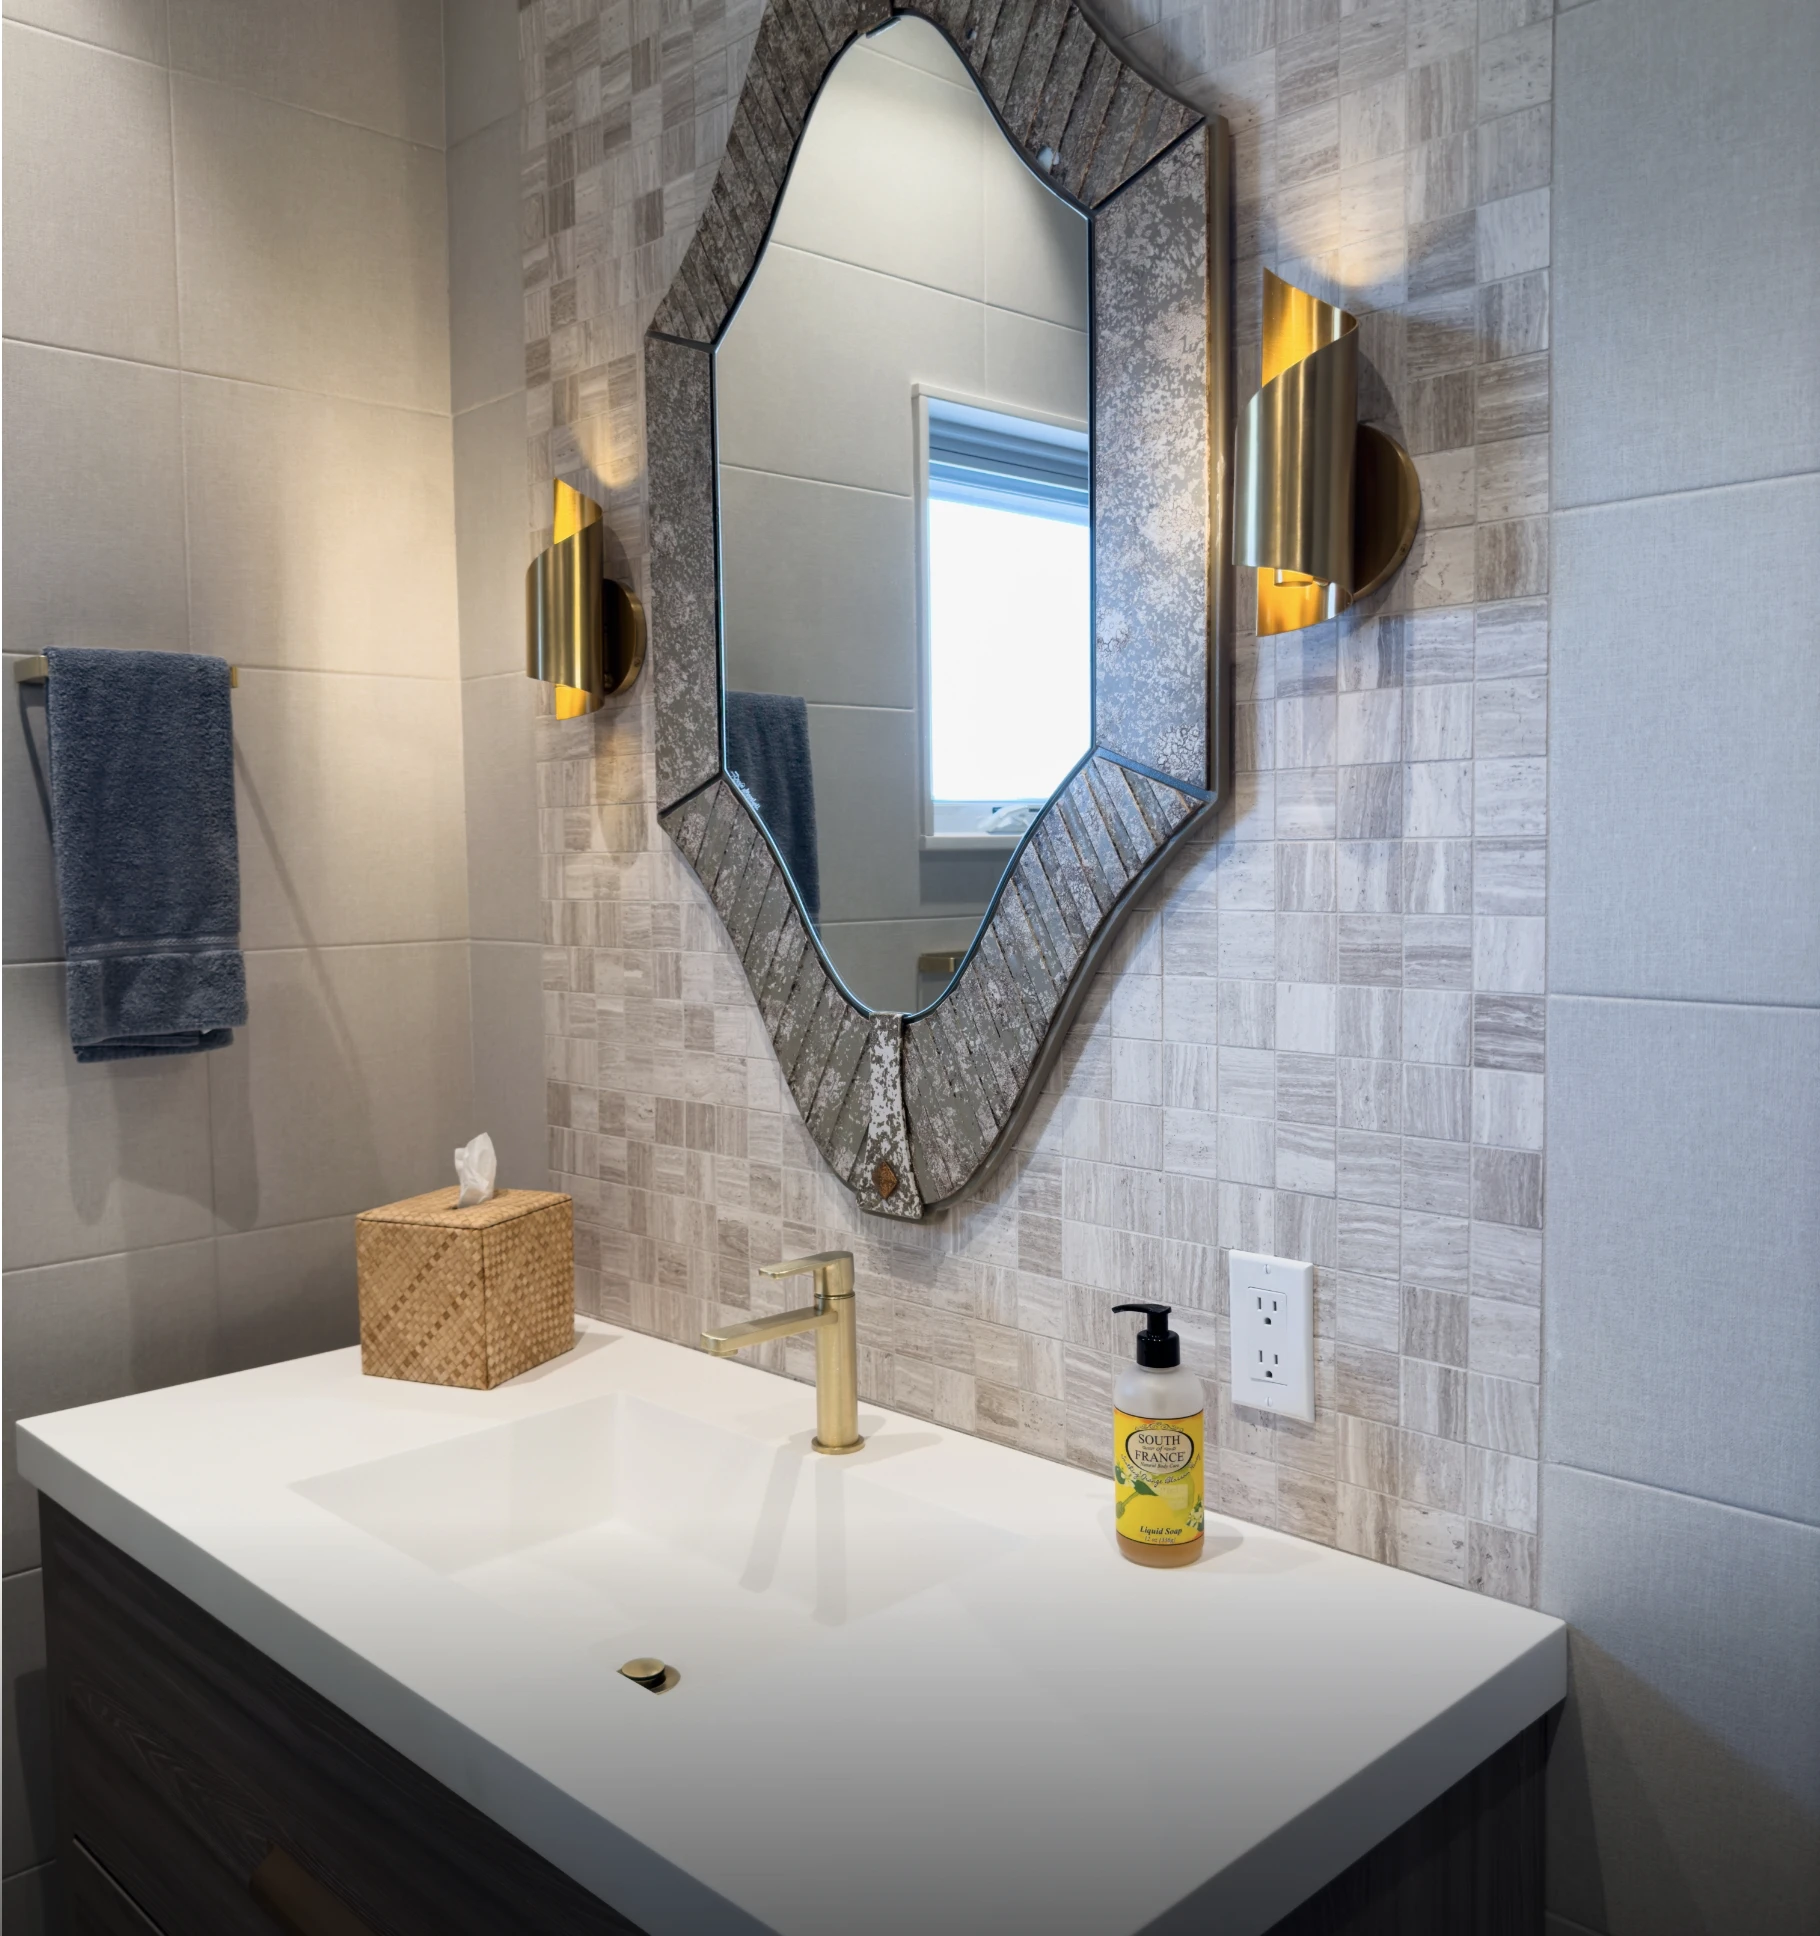 Square mosaic accent tiling